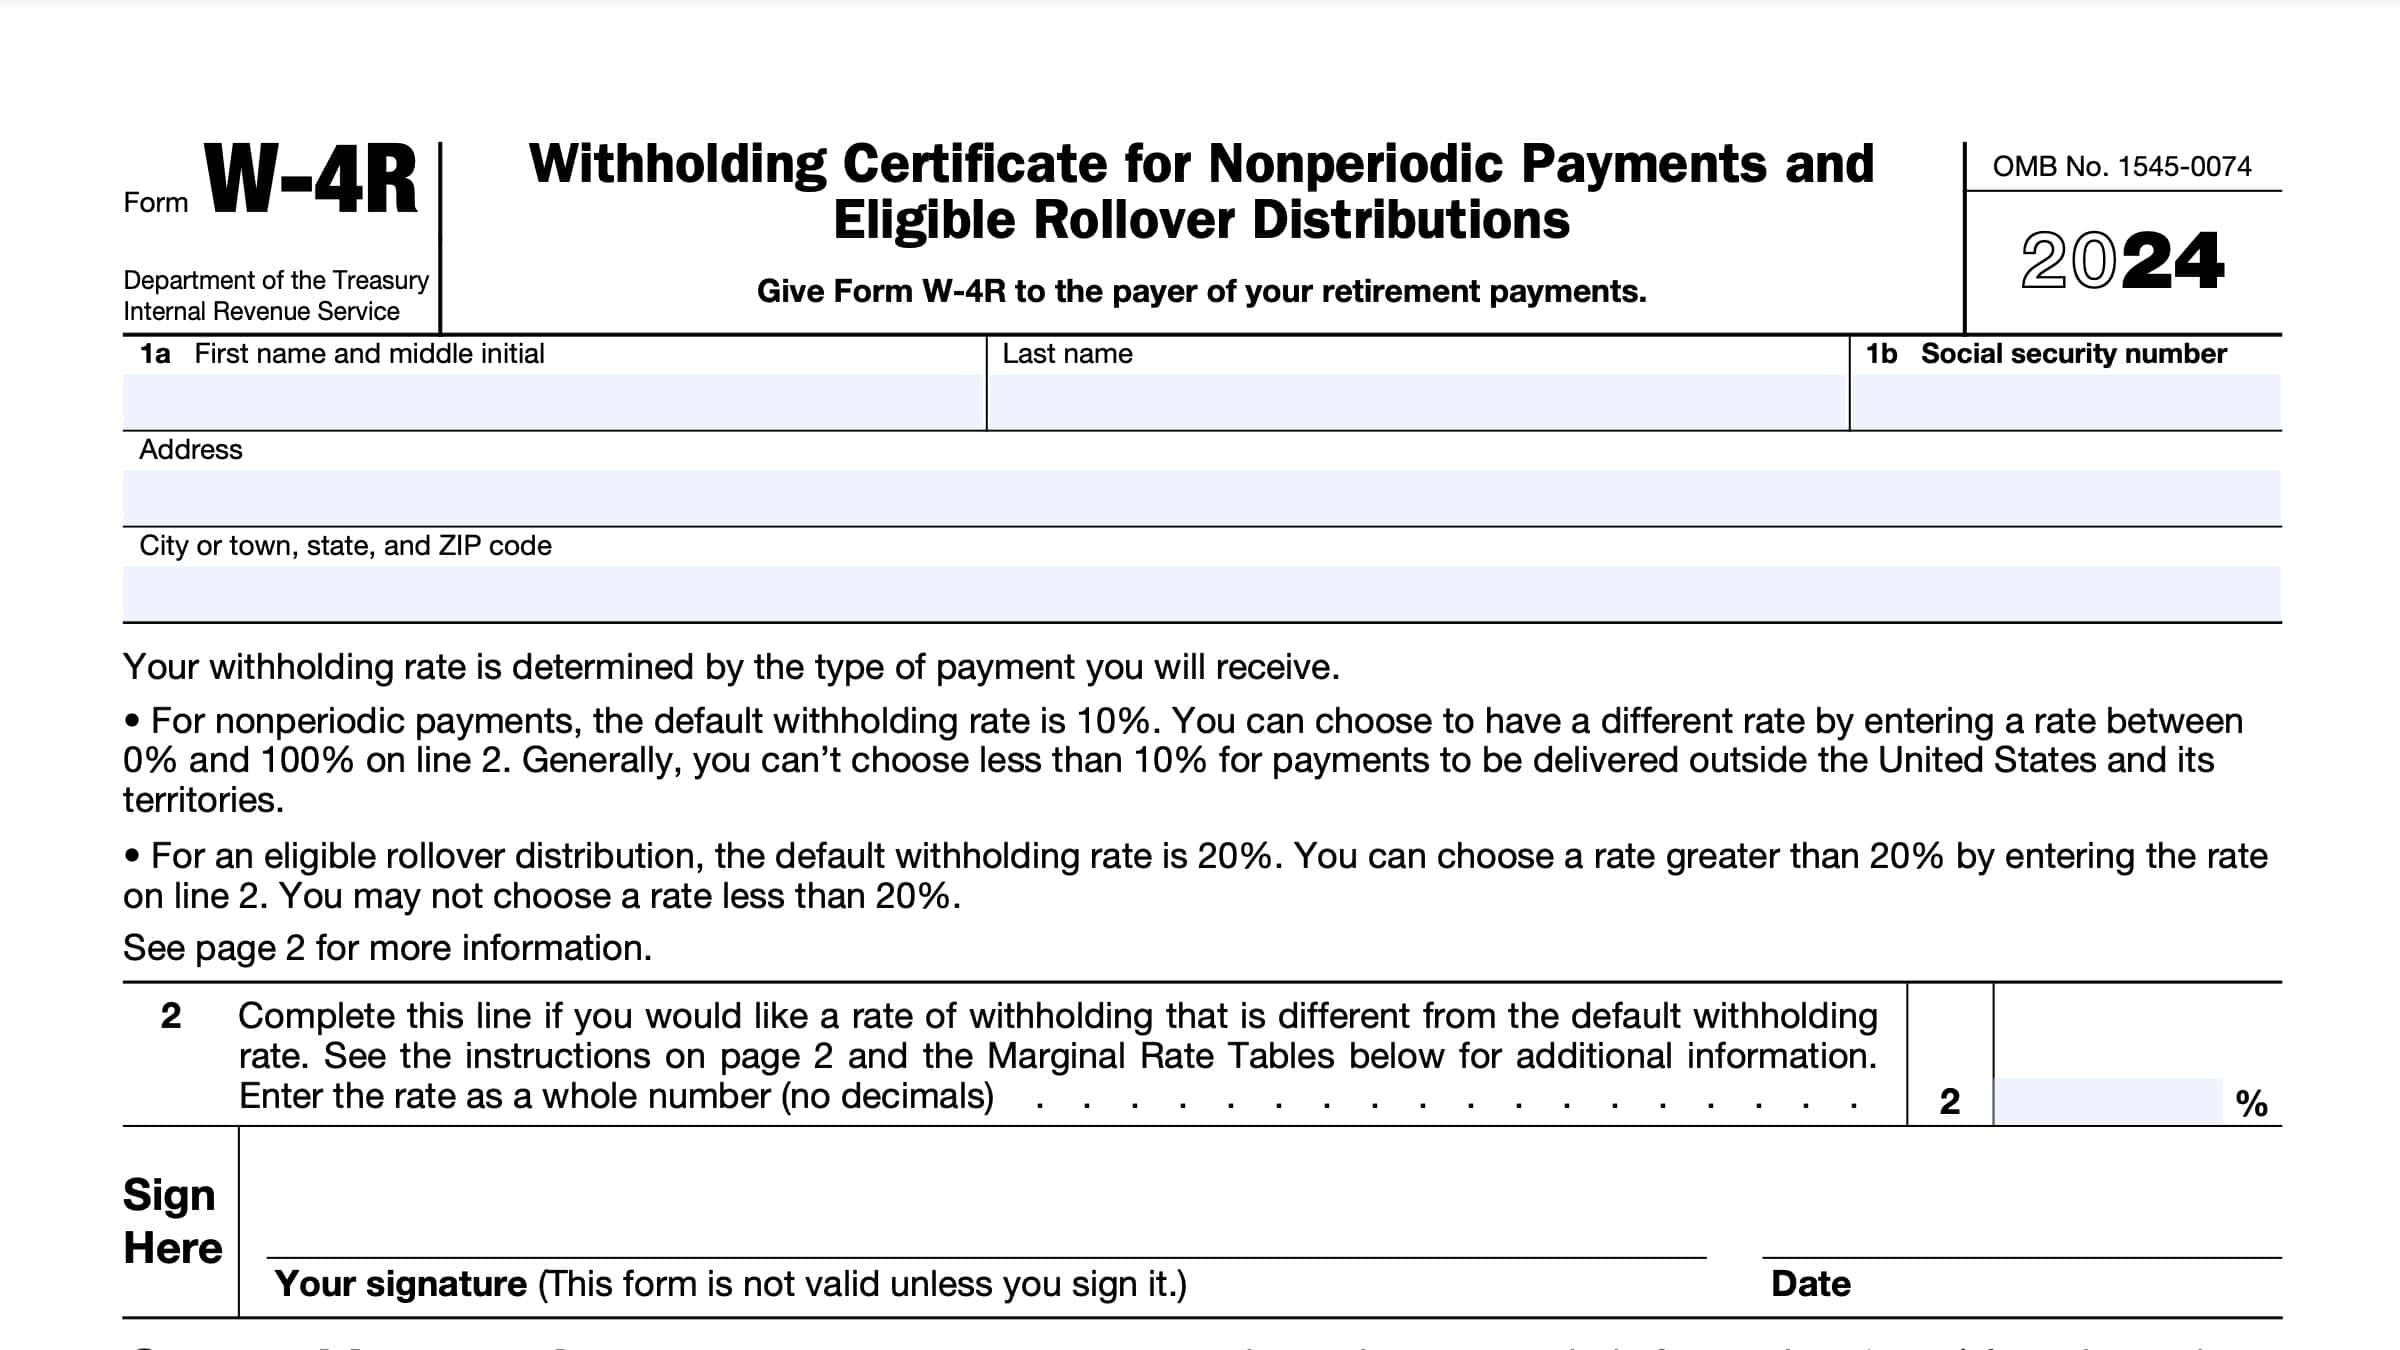 irs form w-4, withholding certificate for nonperiodic payments and eligible rollover distributions